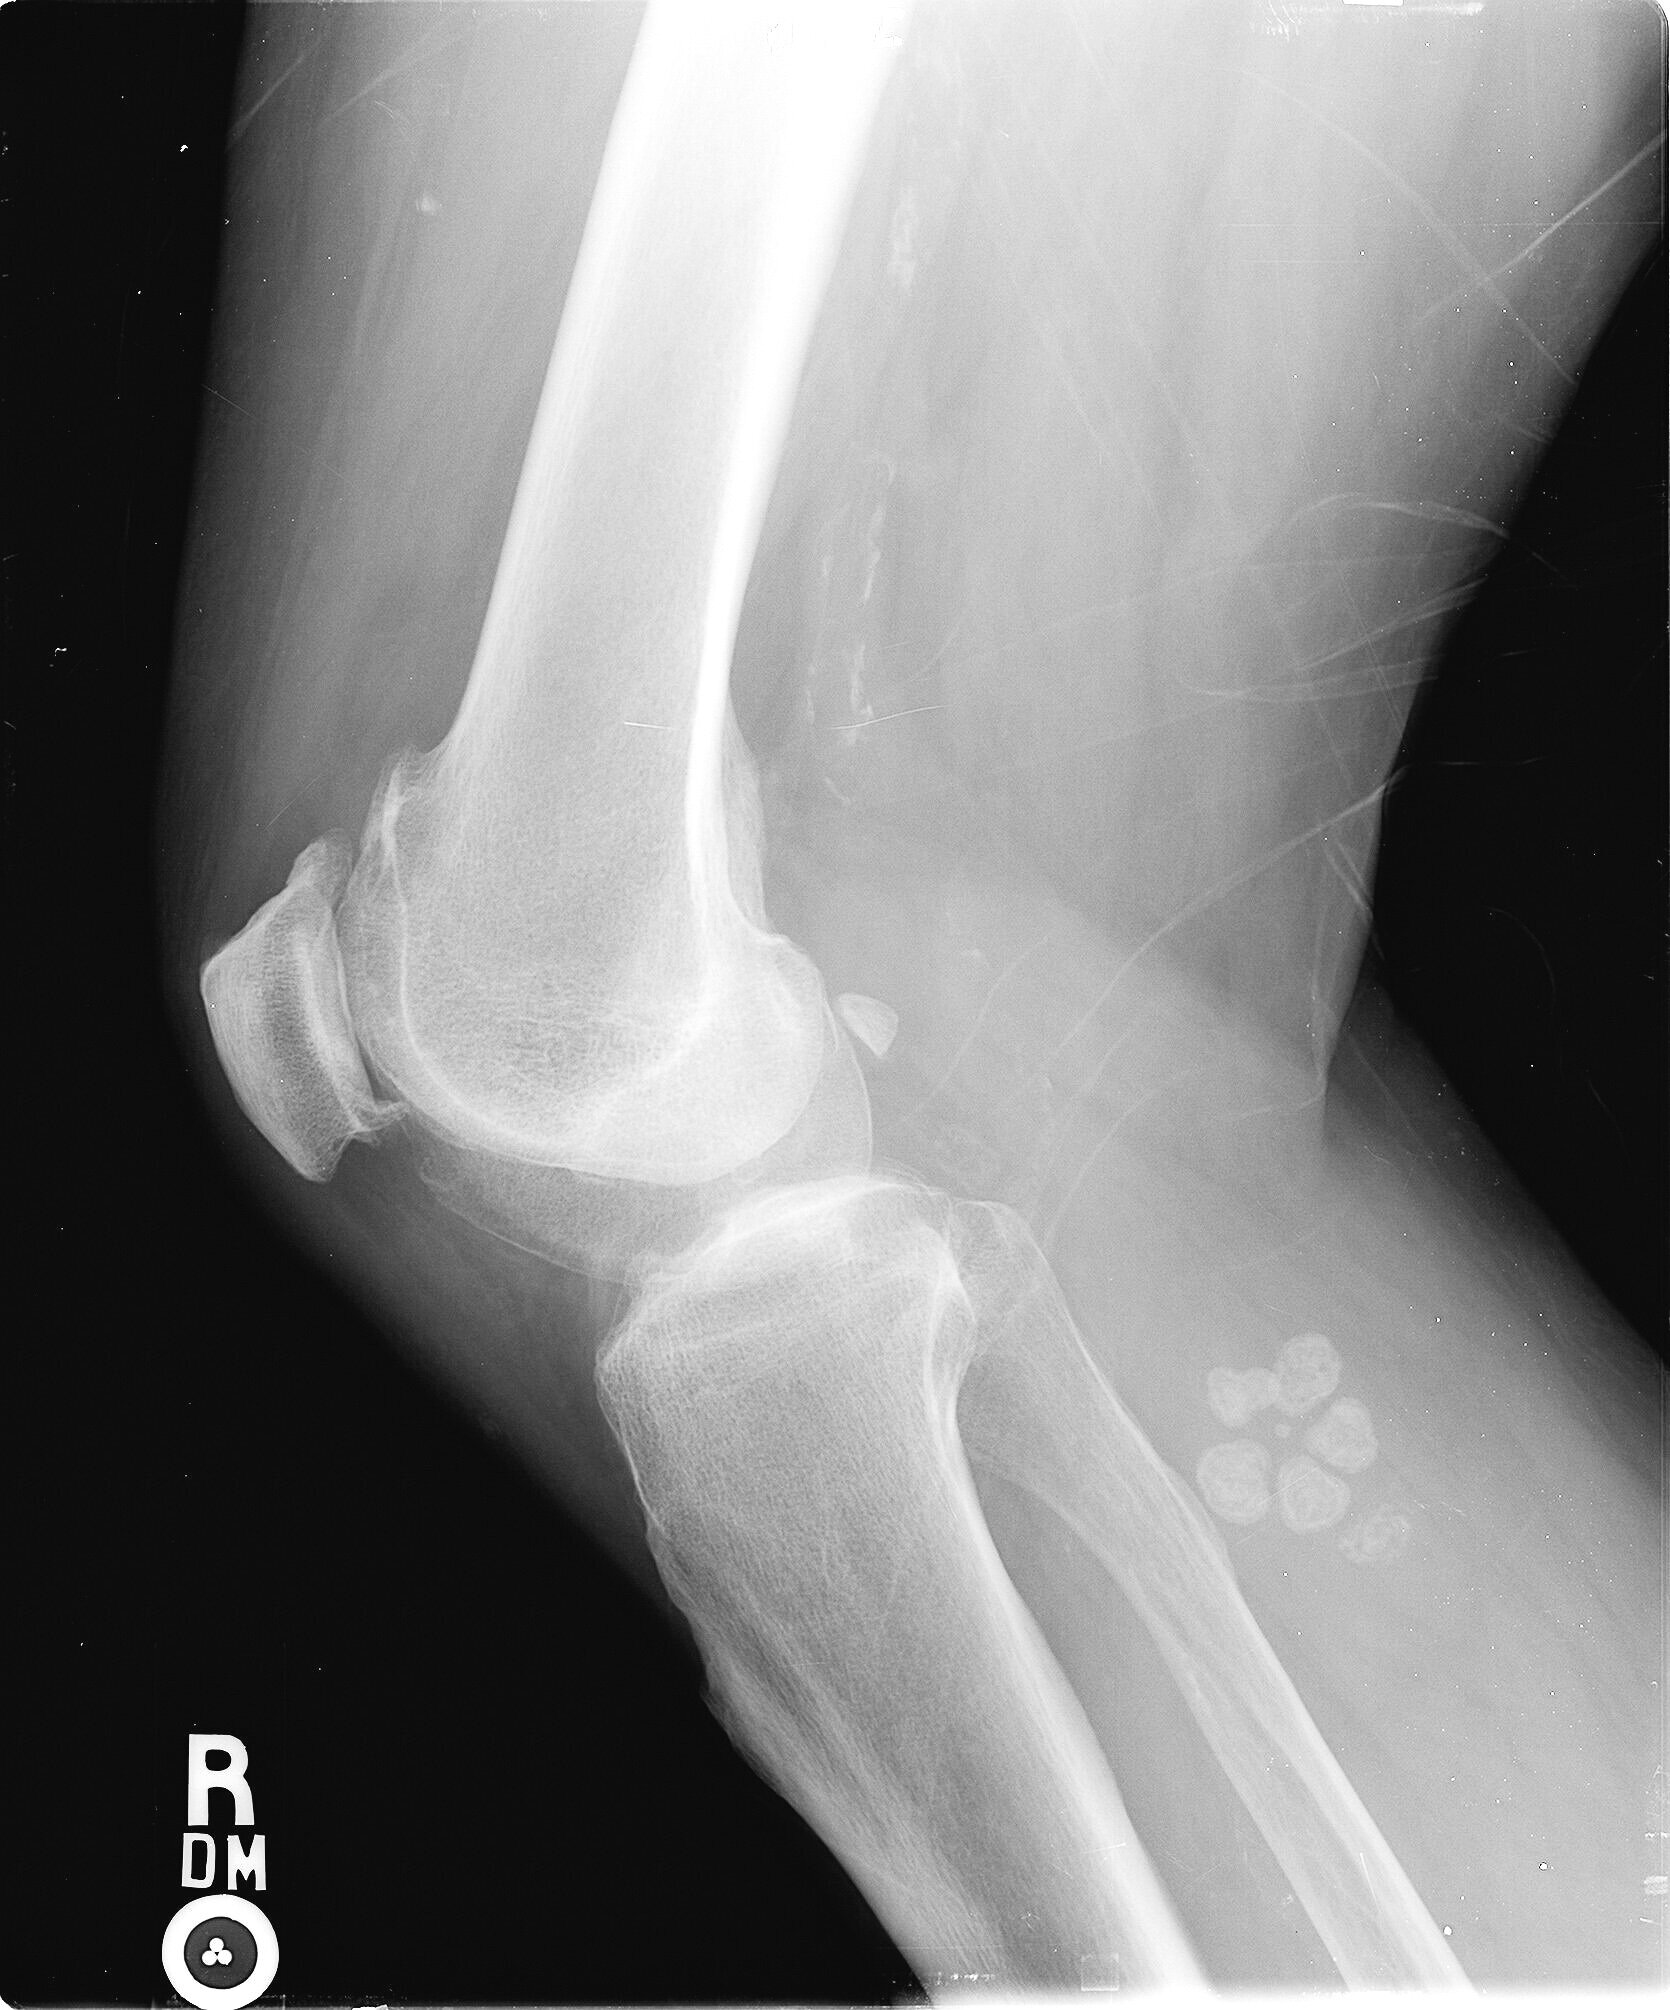  The flower petal-shaped object with the density of bone found in the calf muscle below Terry’s right knee. 